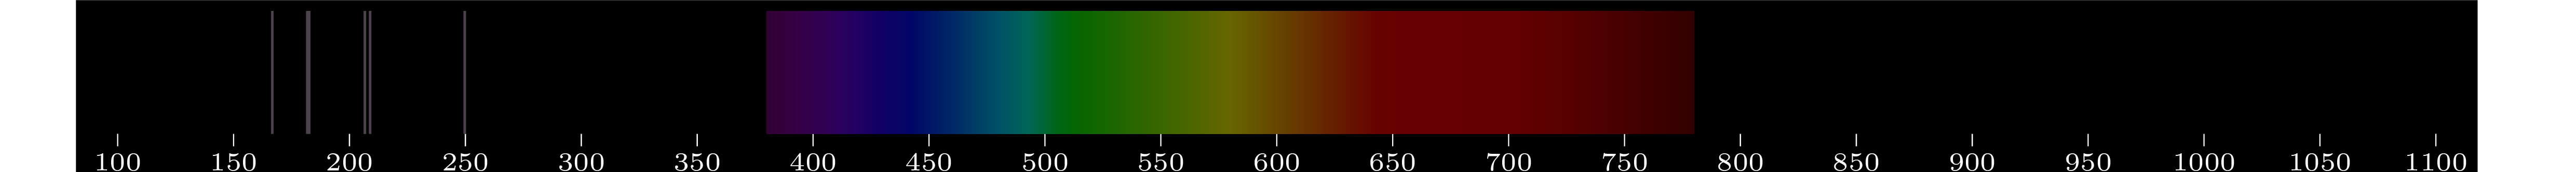 emmision spectra of element B